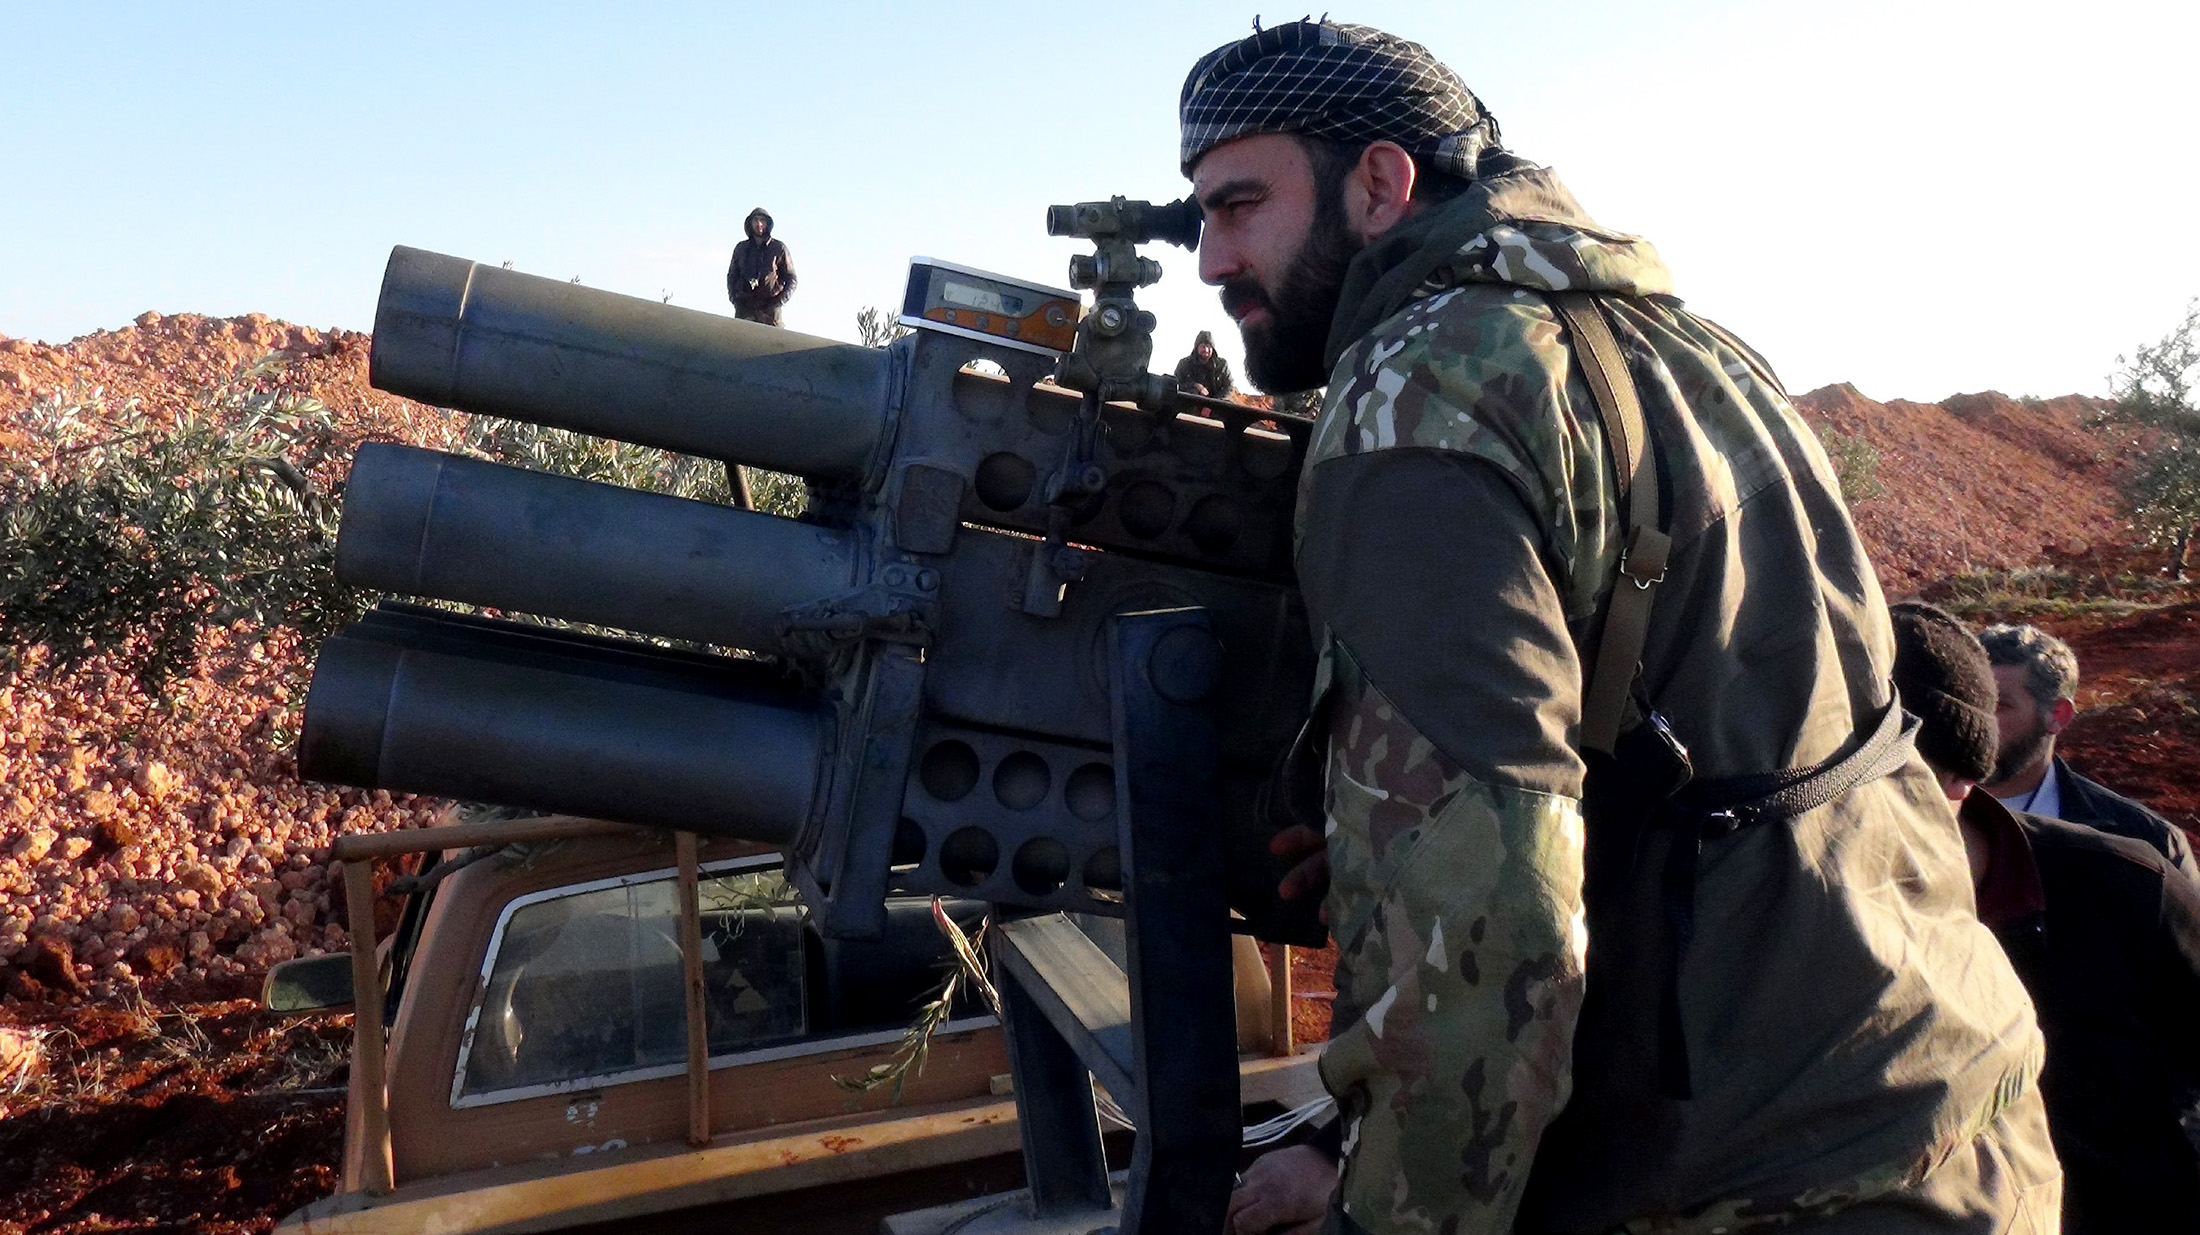 Syrian opposition forces prepare to attack regime controlled Tel Cibin village with heavy weapons, in Aleppo, on Feb. 2.
